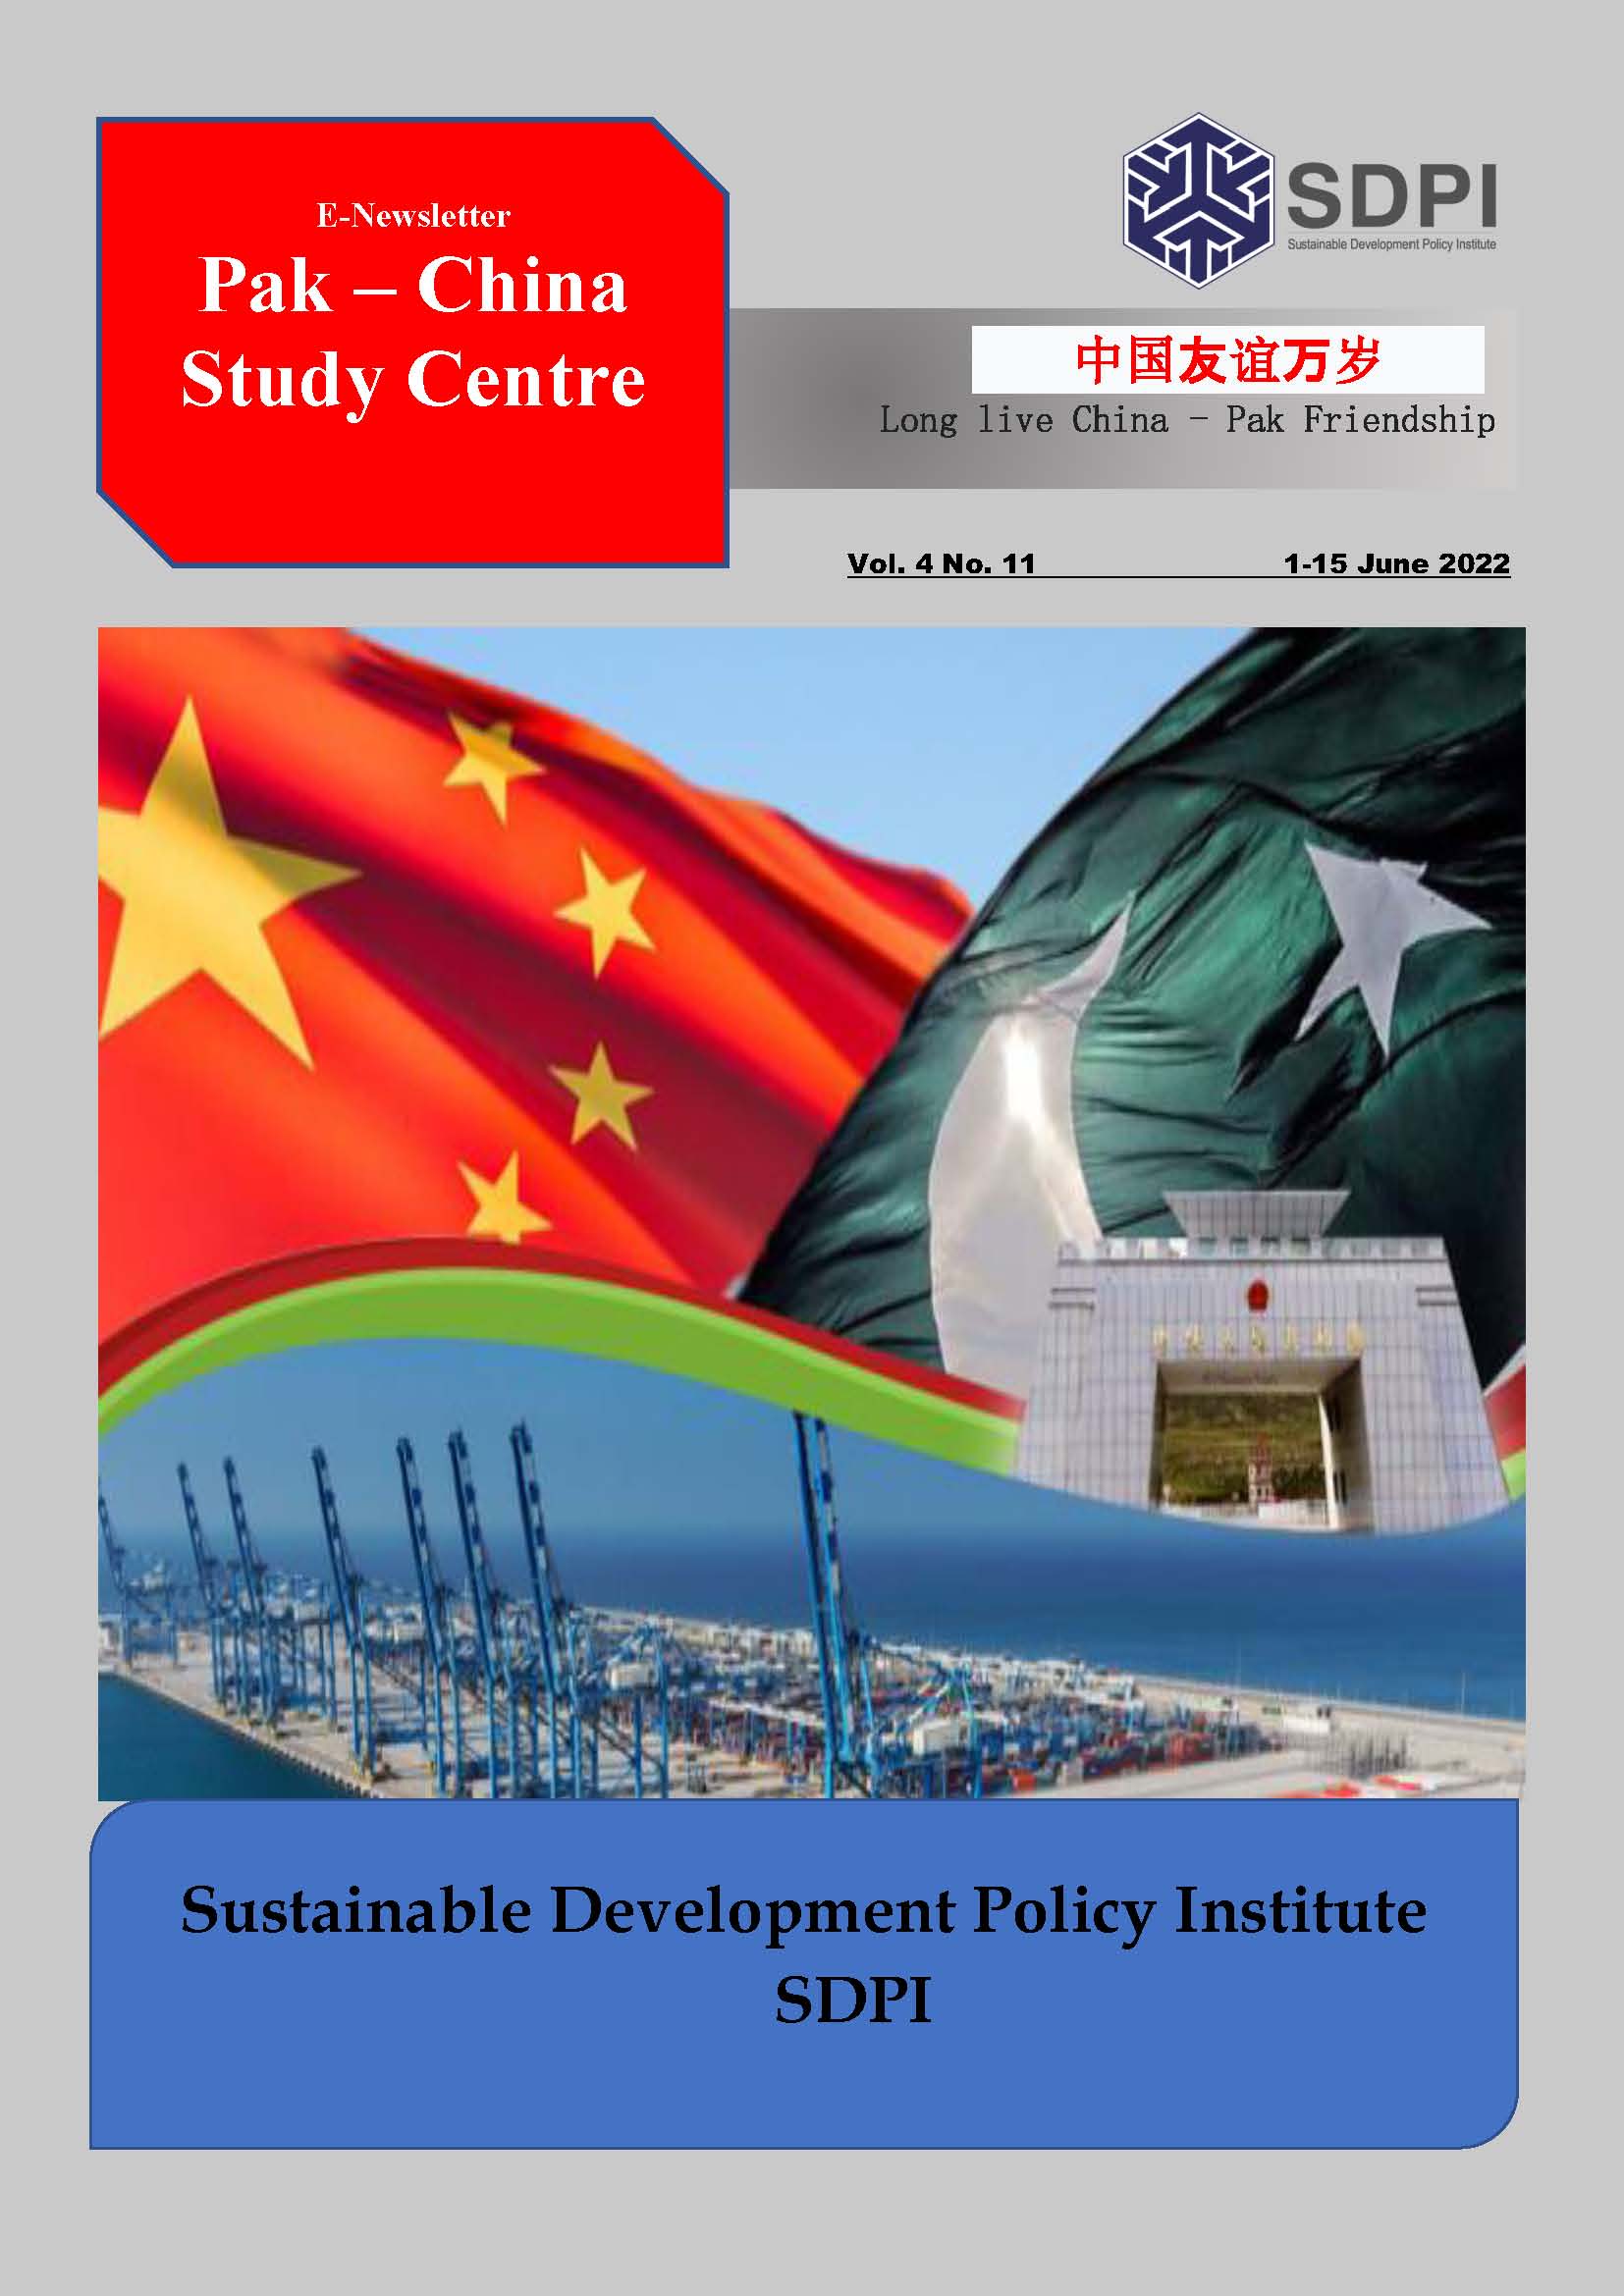 E-Newsletter for China Study Centre Vol. 4, No. 11, Issue 1-15 June 2022